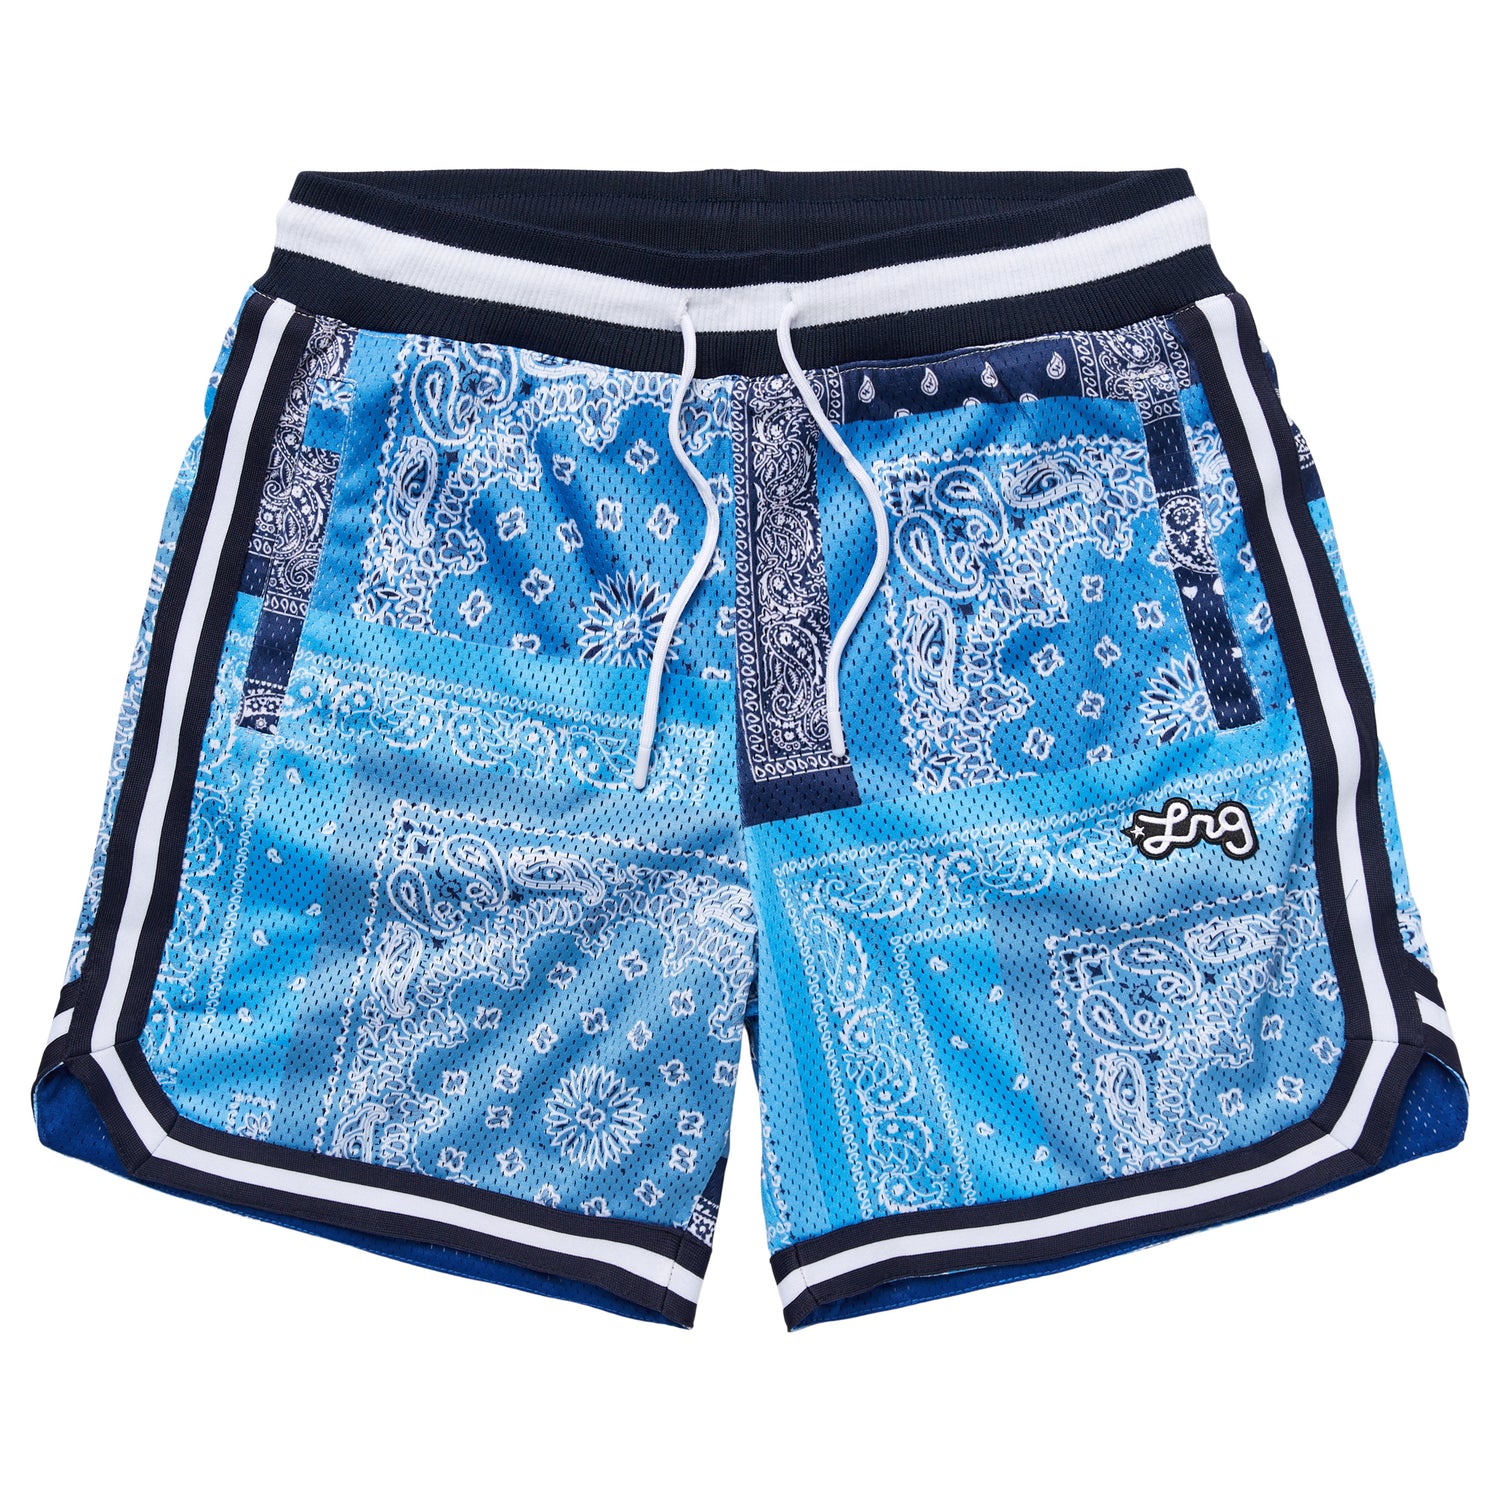 STRICTLY SCRIPT ROOTS MESH SHORTS - BLUE